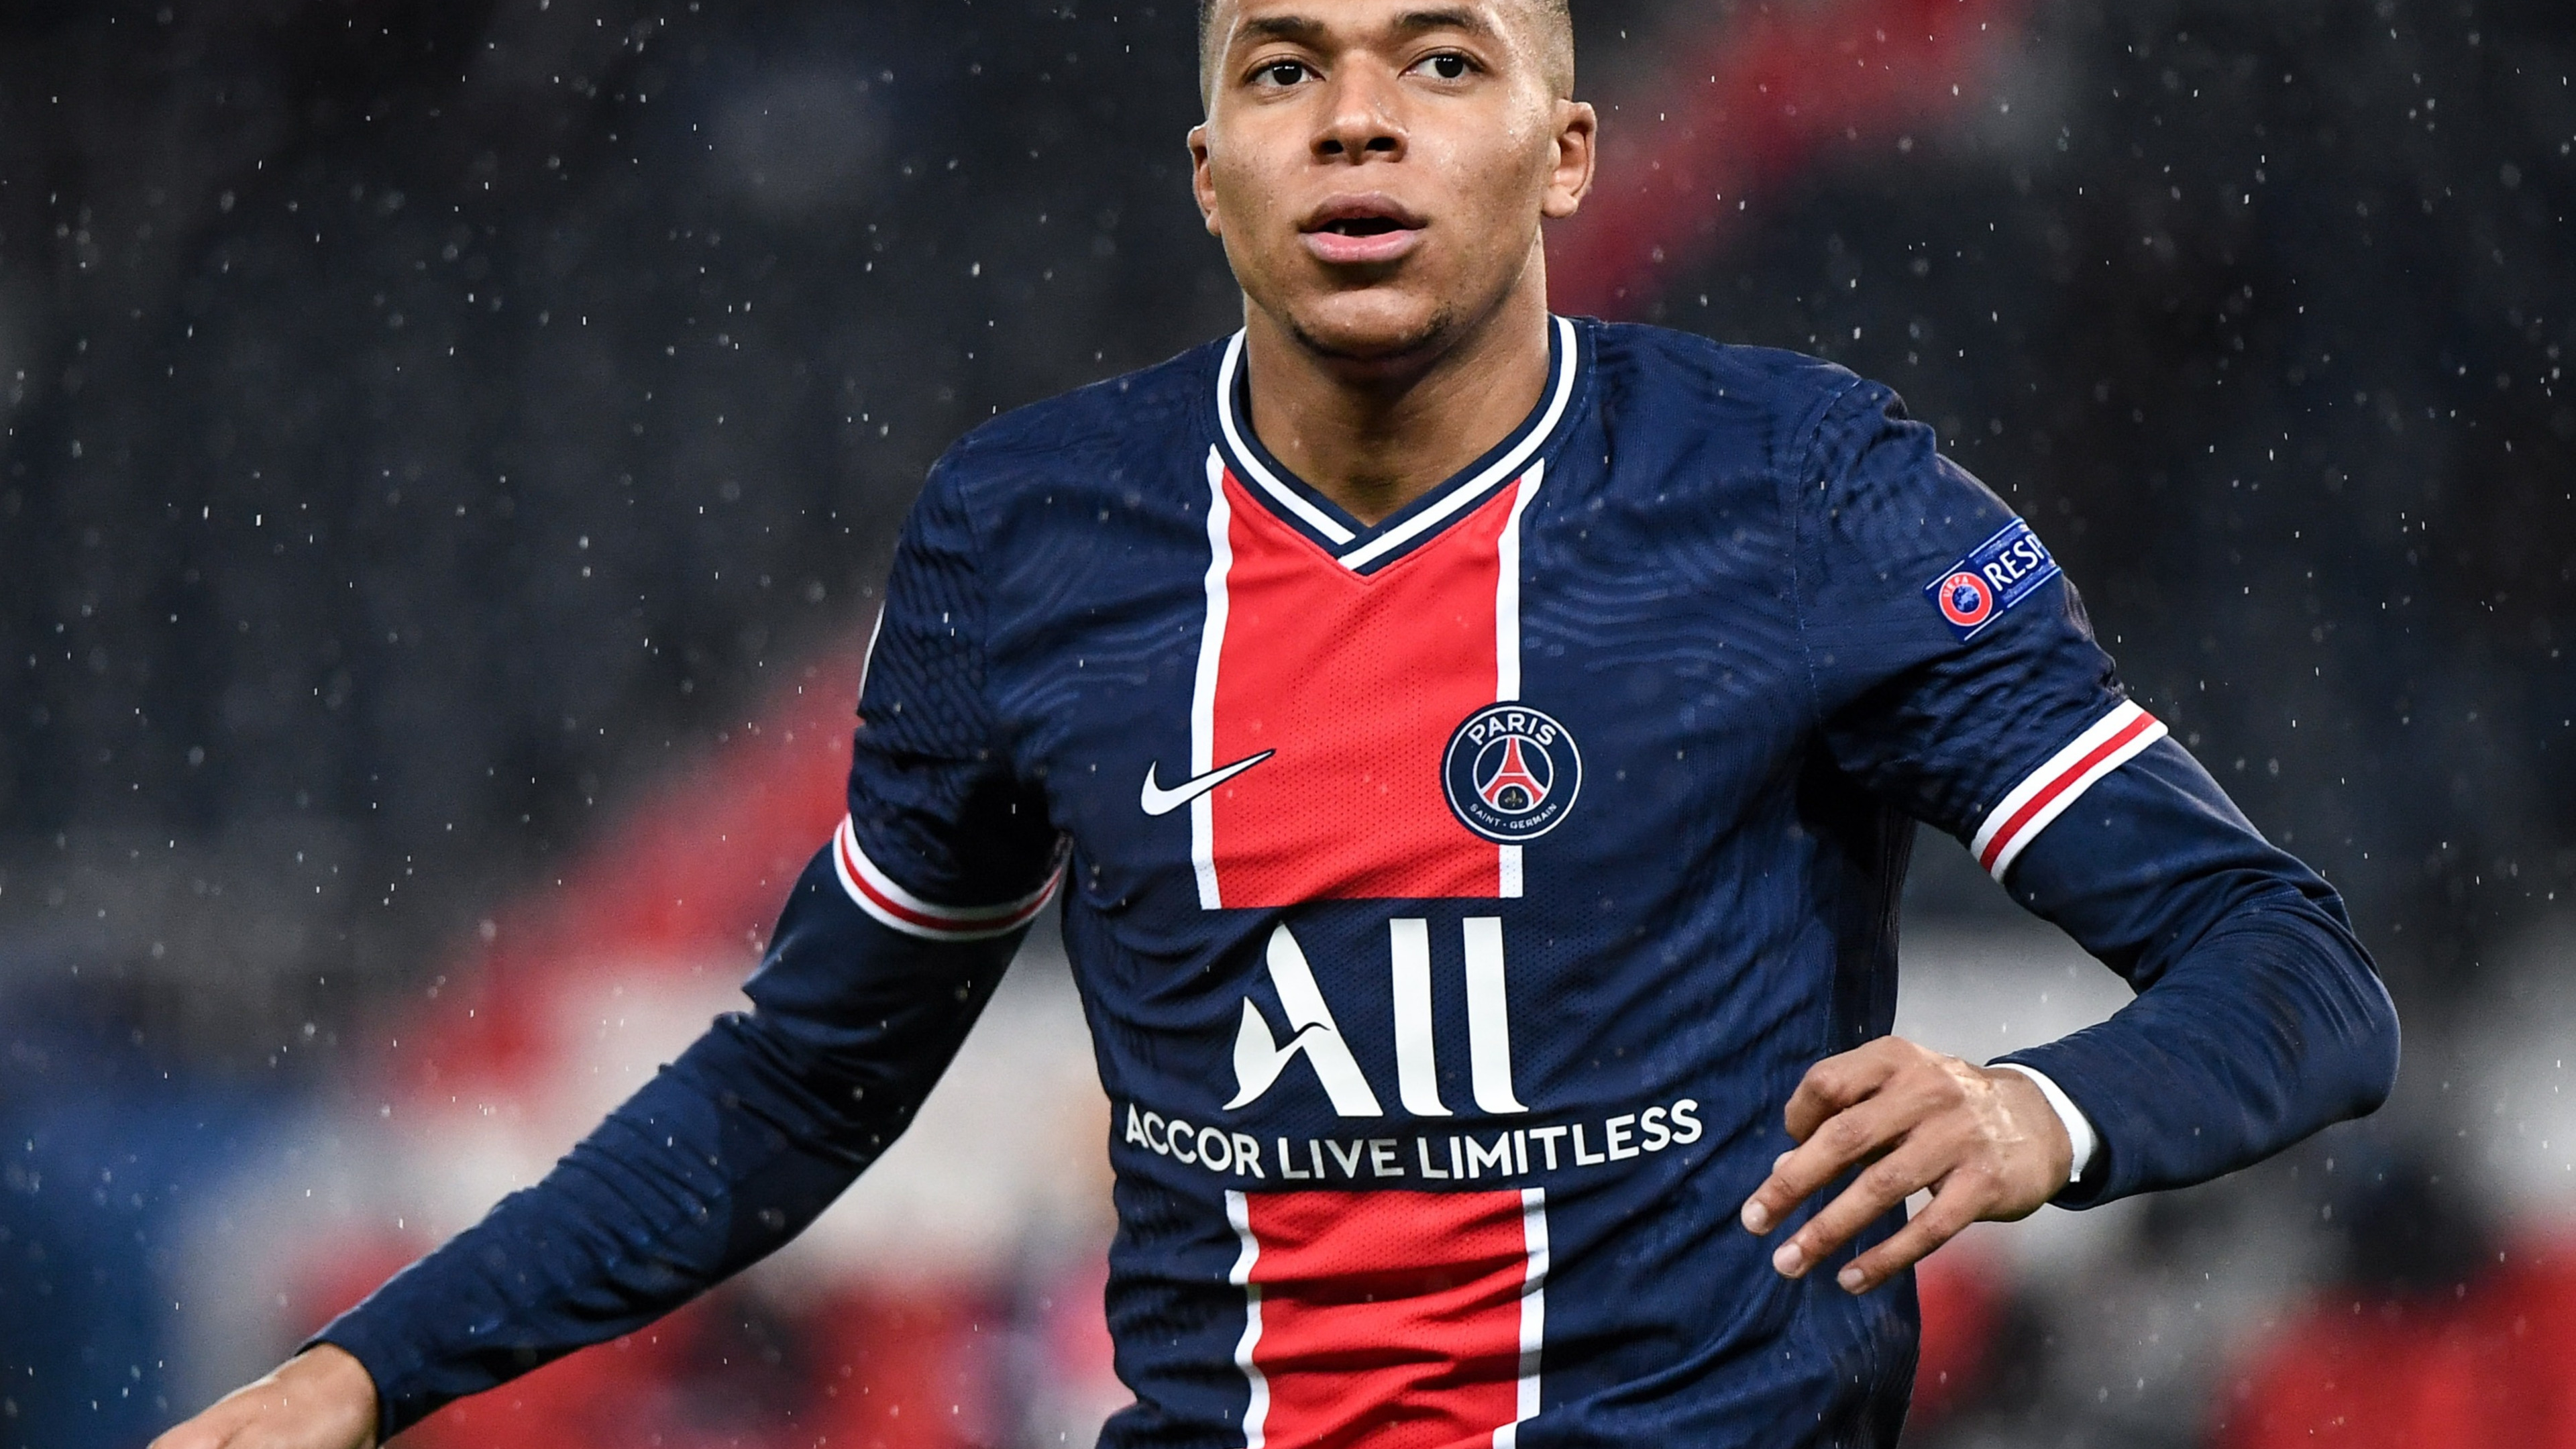 3840x2160 Kylian Mbappe Footballer 4k HD 4k Wallpapers, Images, Backgrounds,  Photos and Pictures